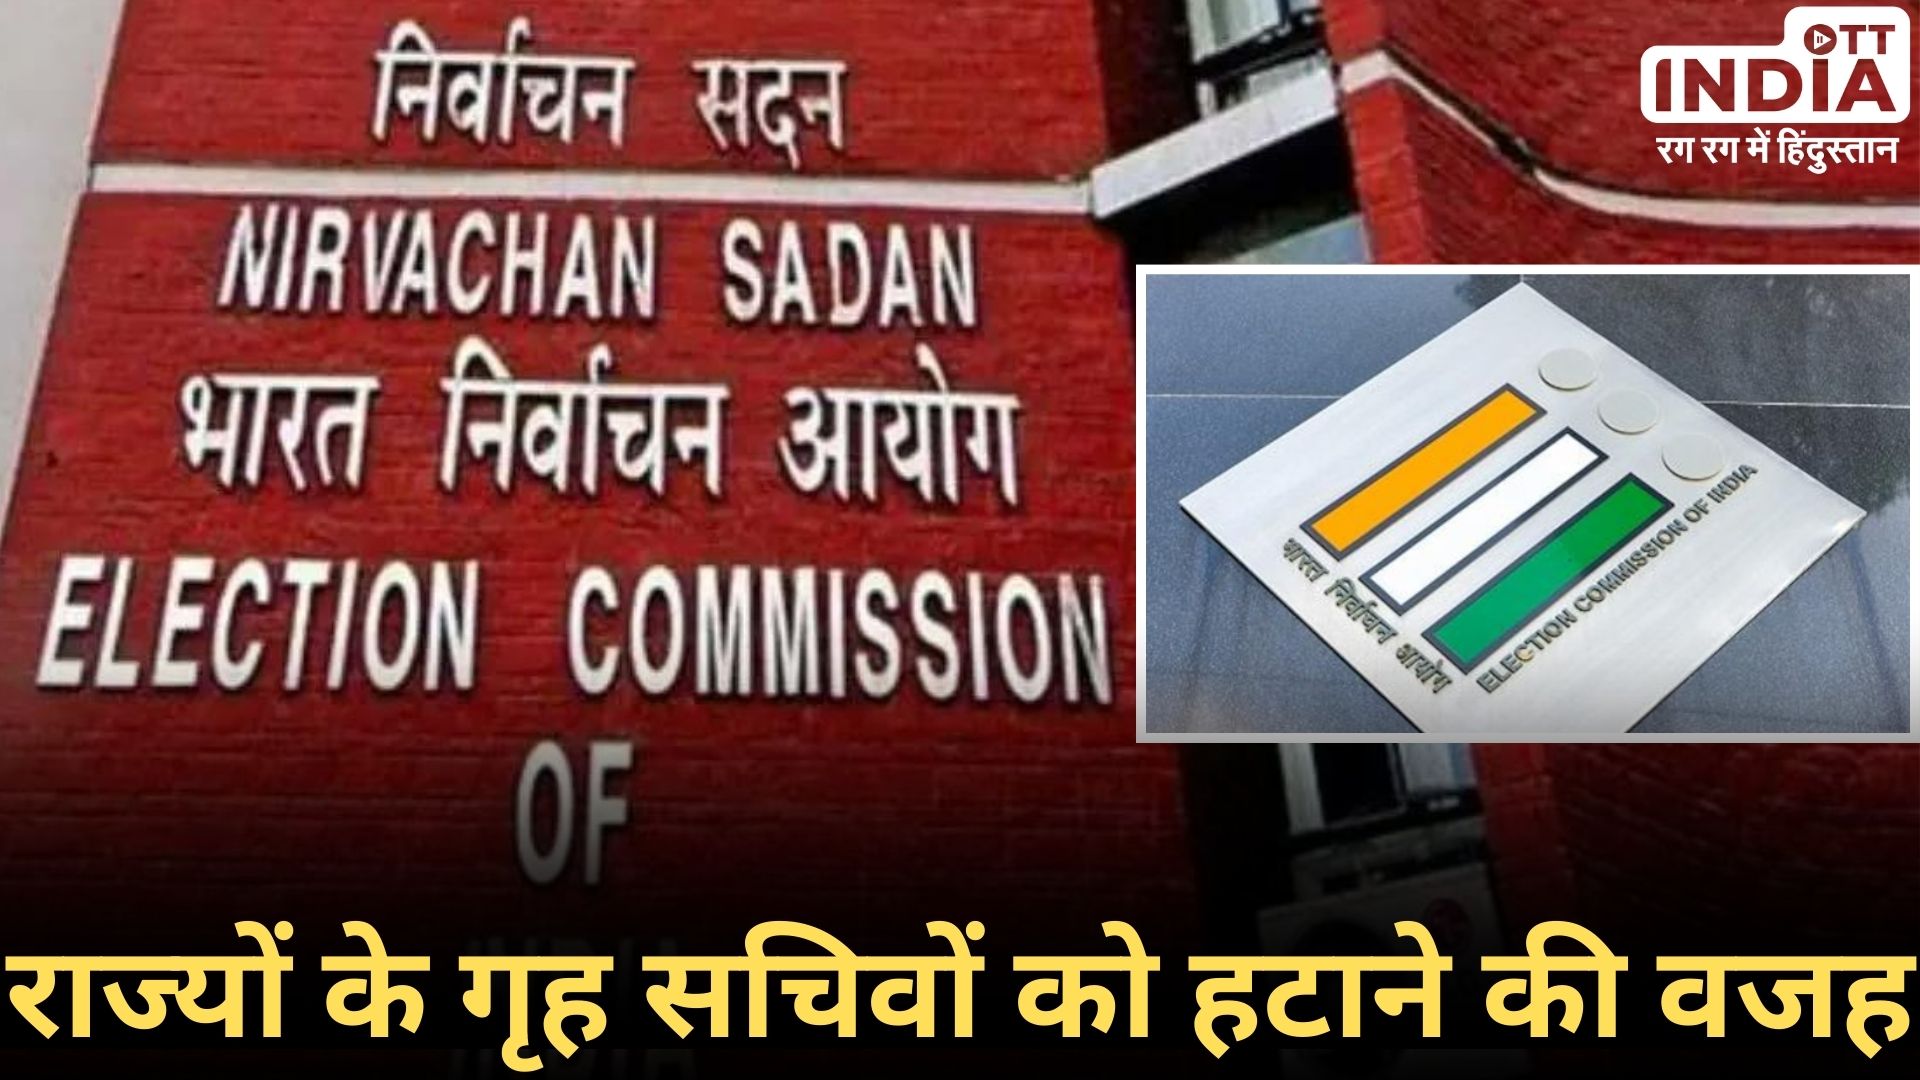 ELECTION COMMISSION ORDER